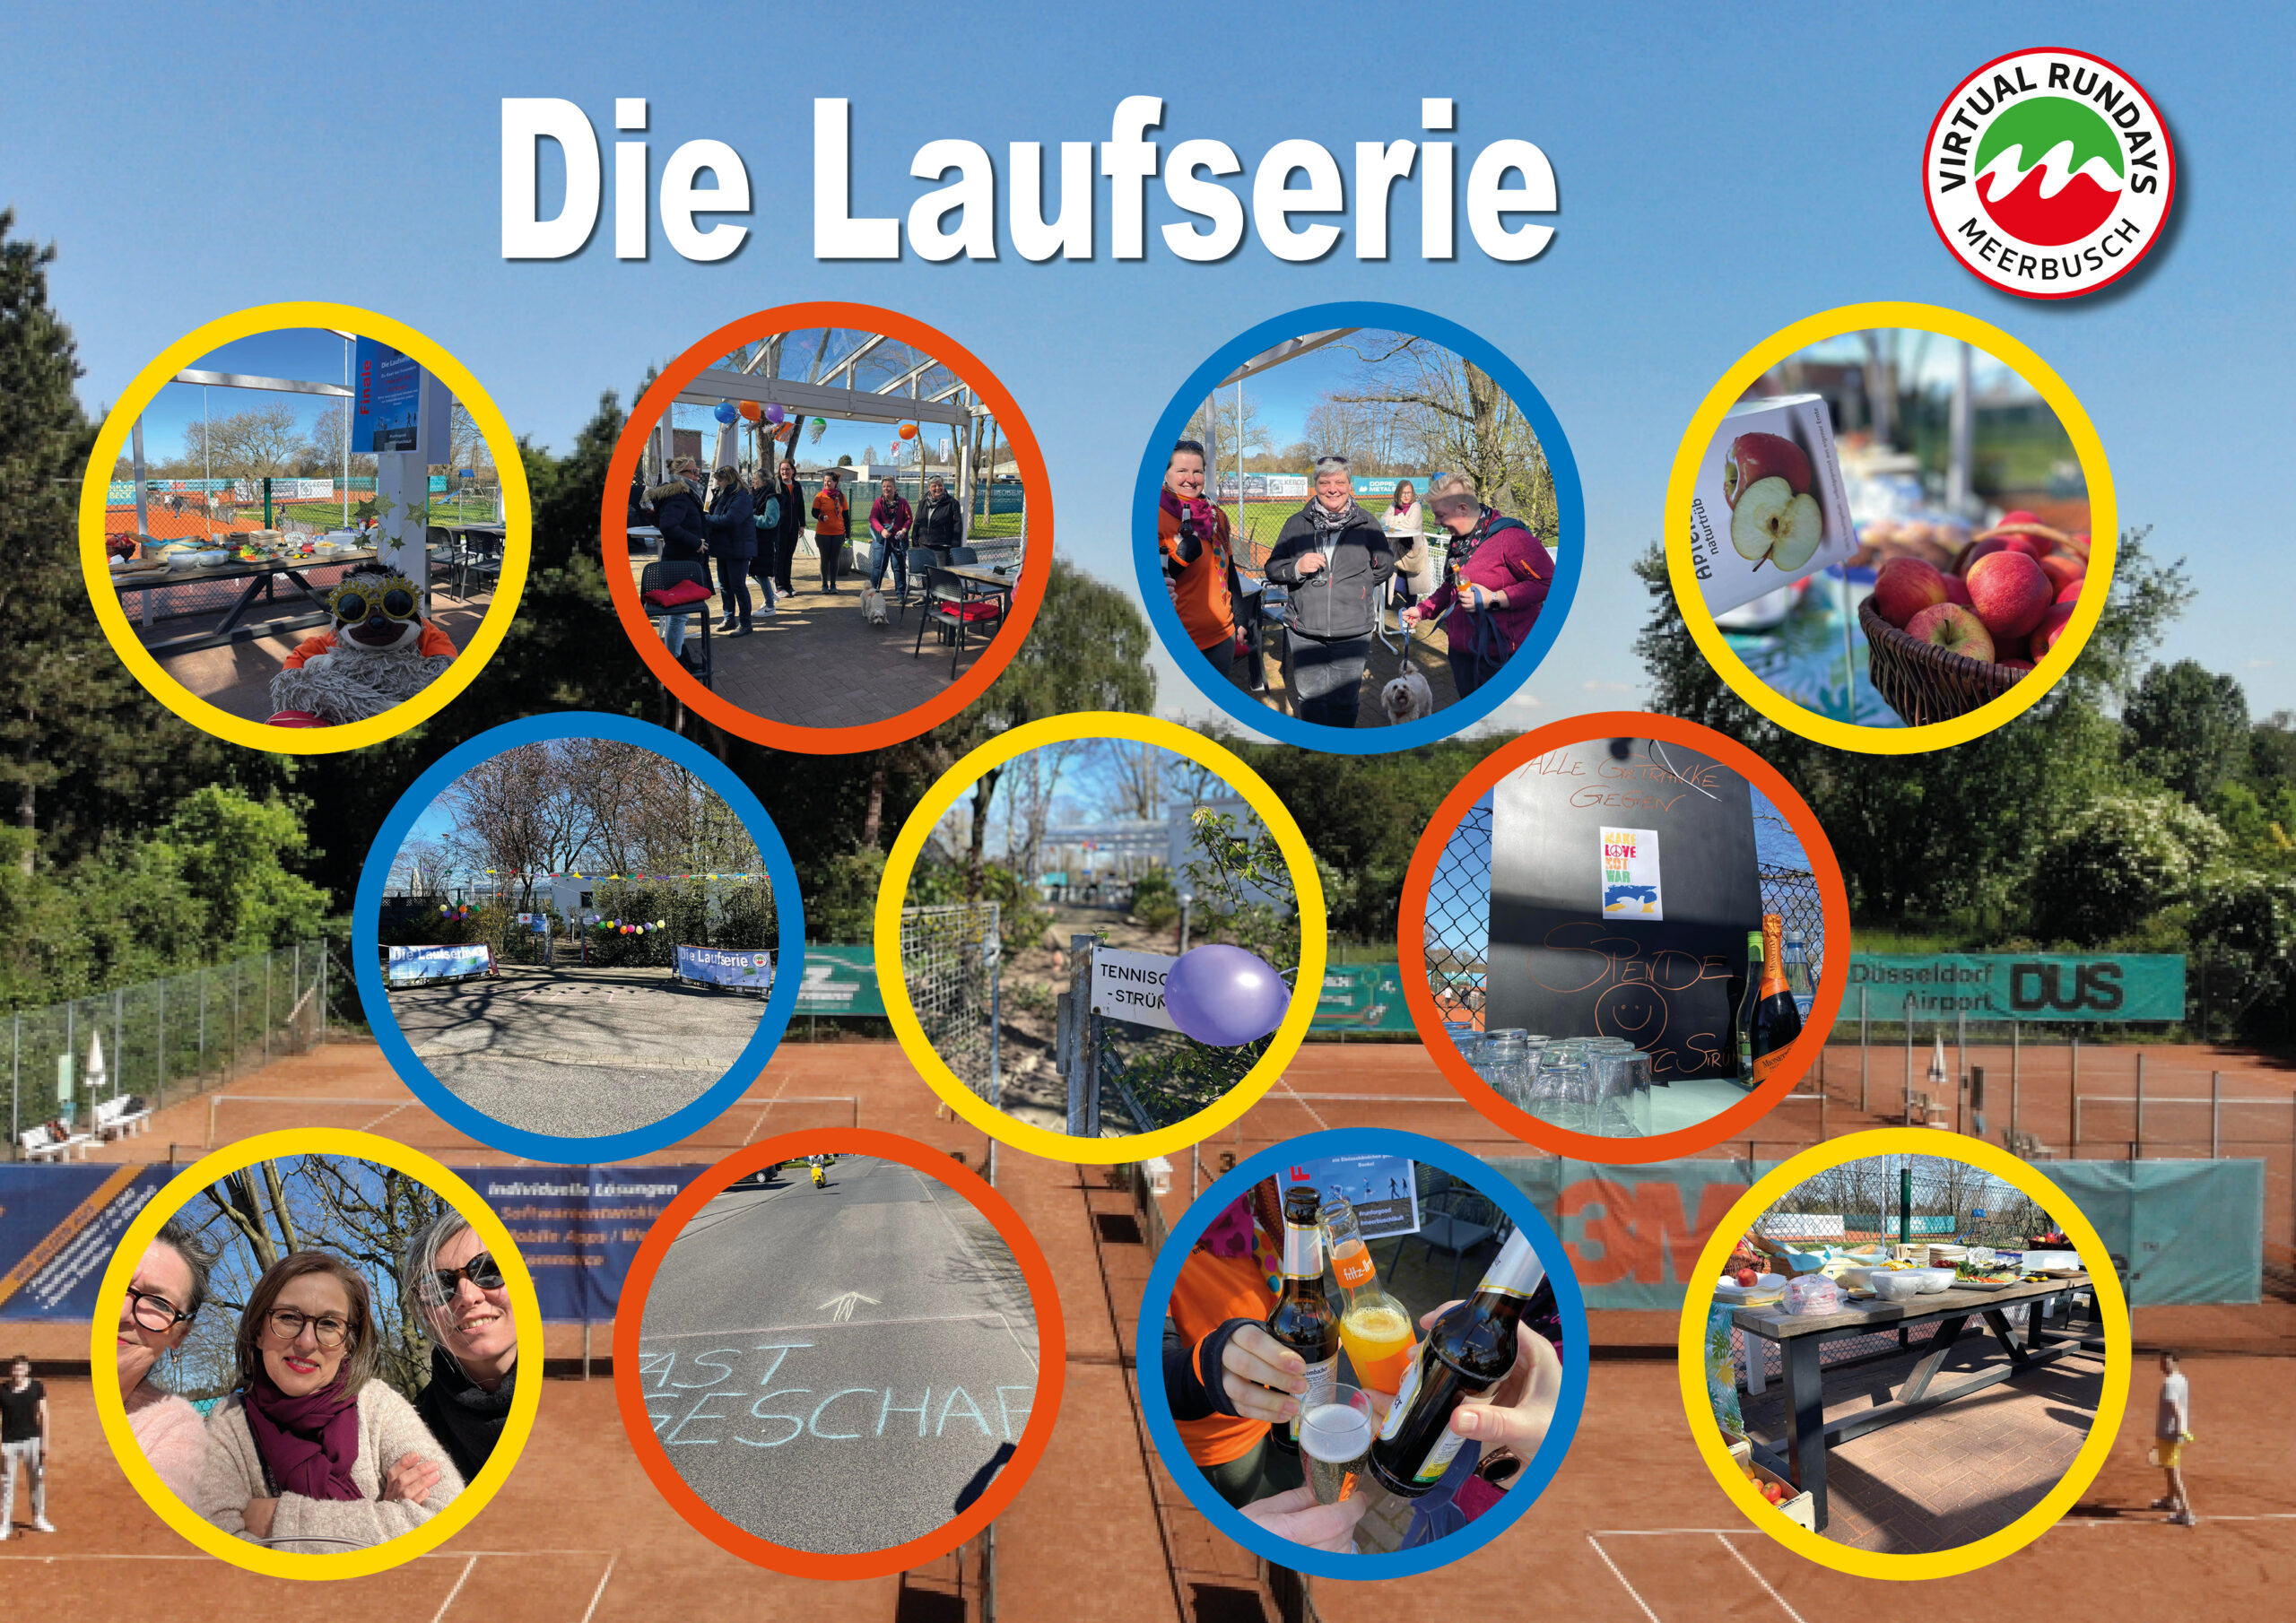 Laufserie 2 Photo Wall4